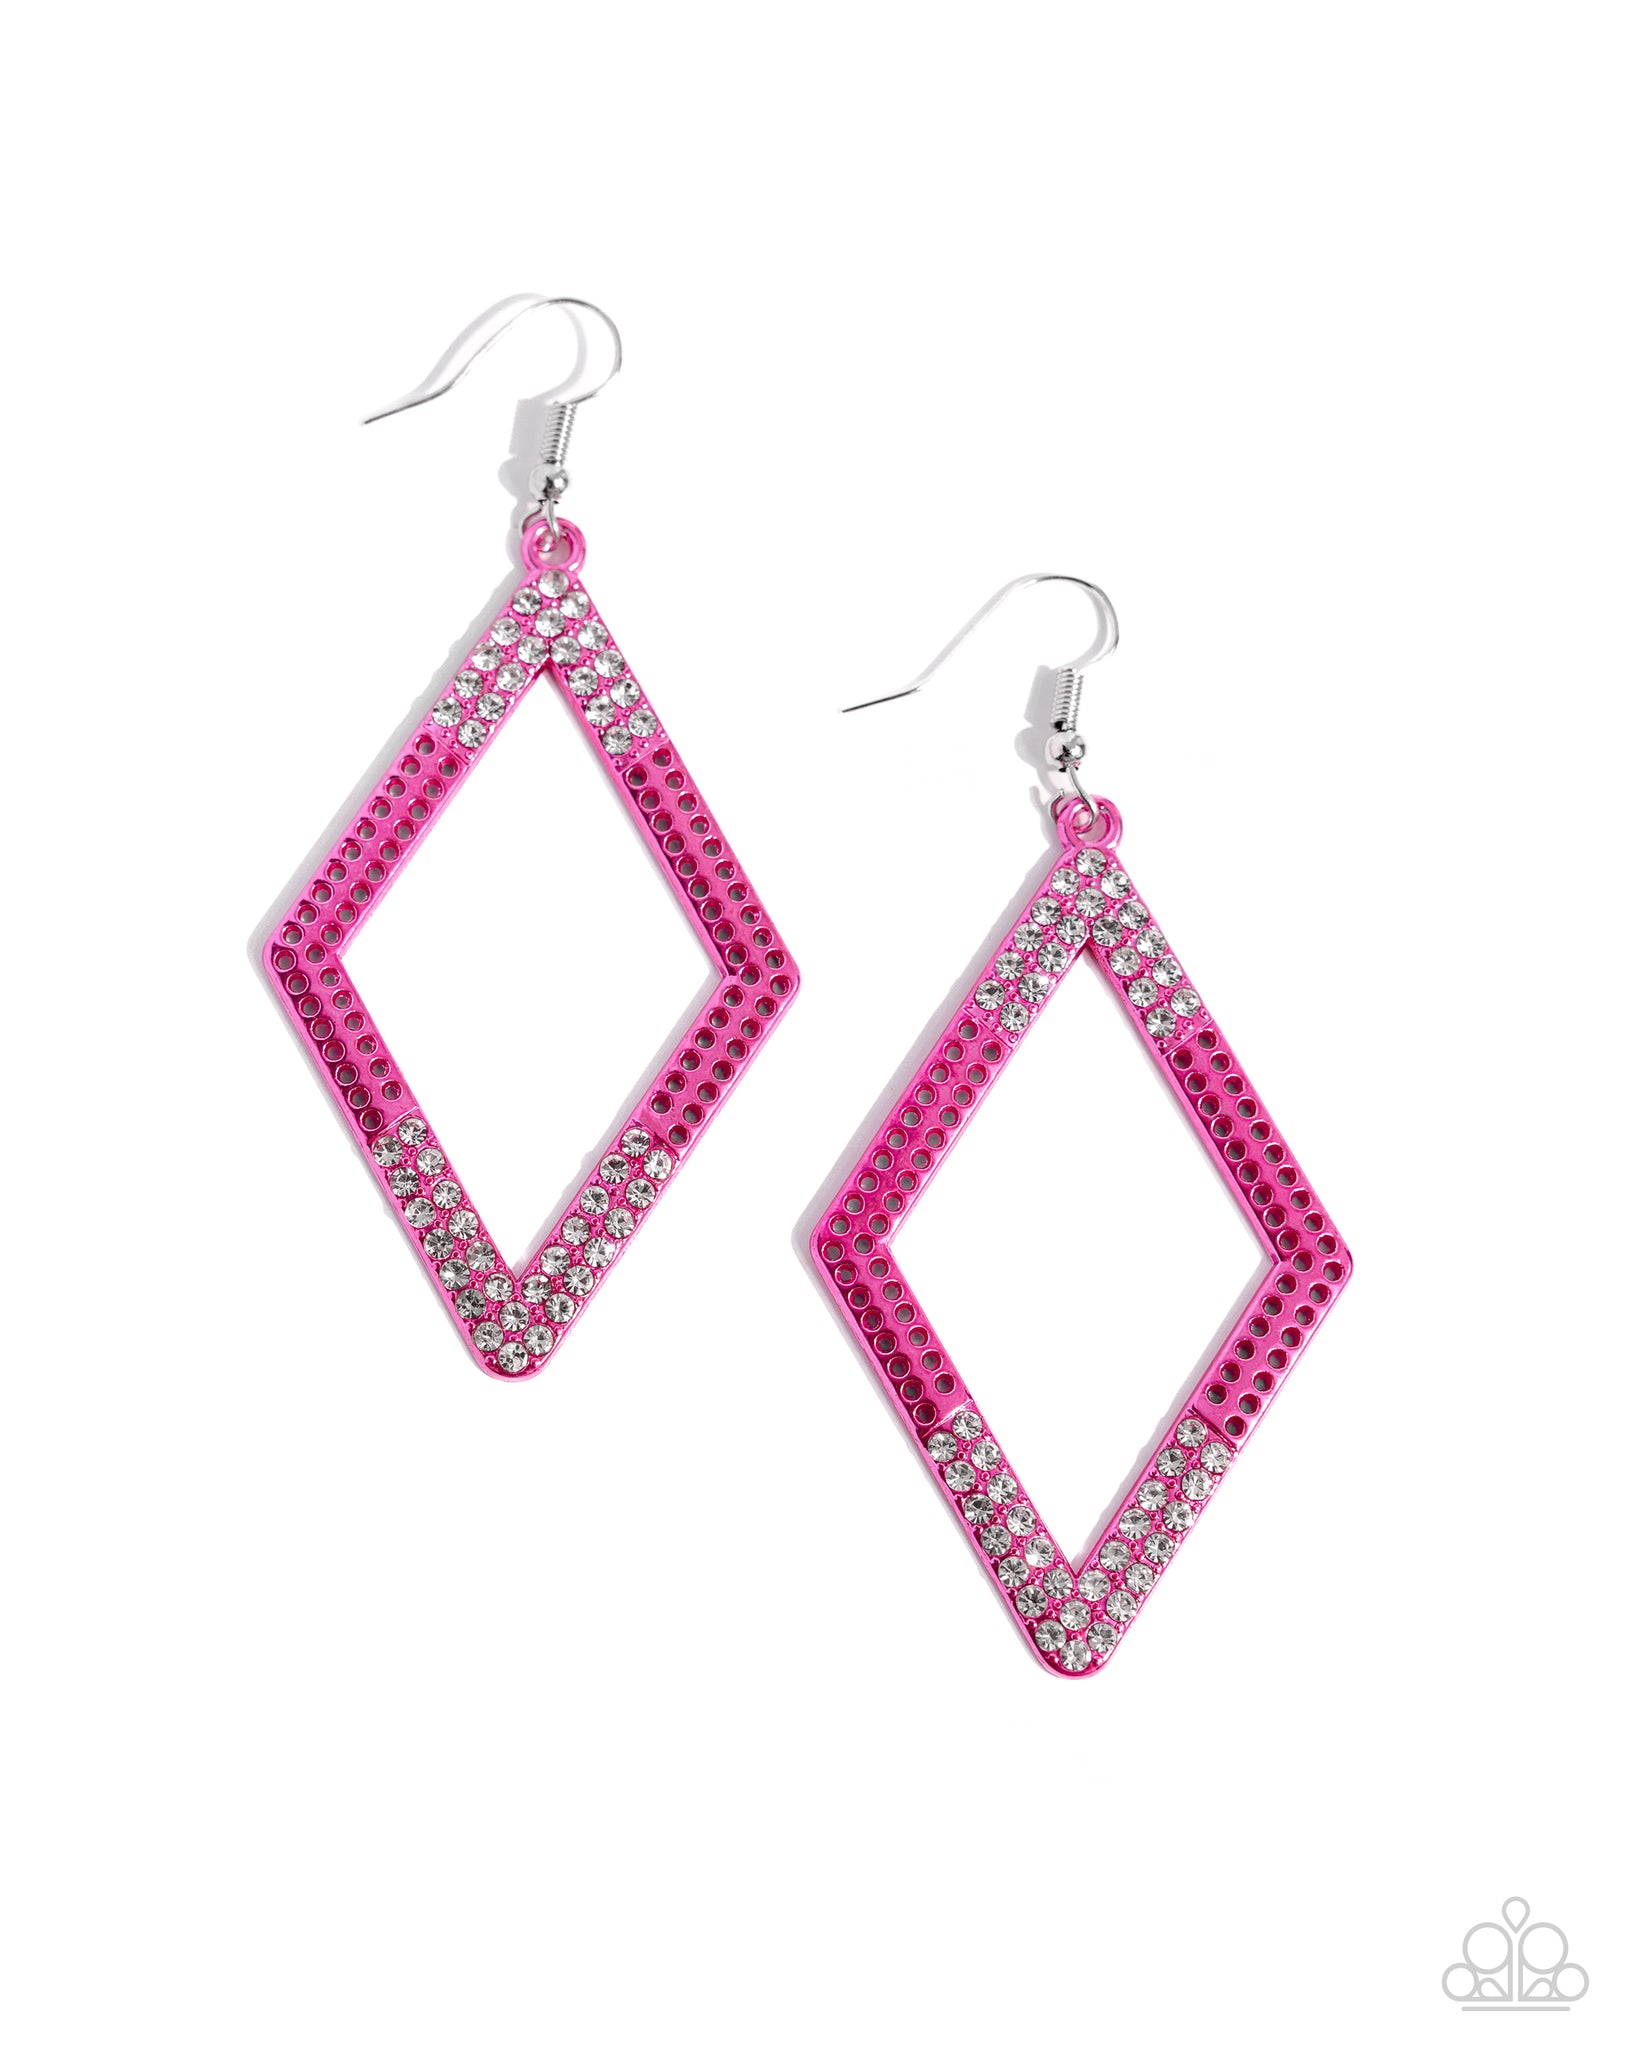 Eloquently Edgy Earrings__Pink